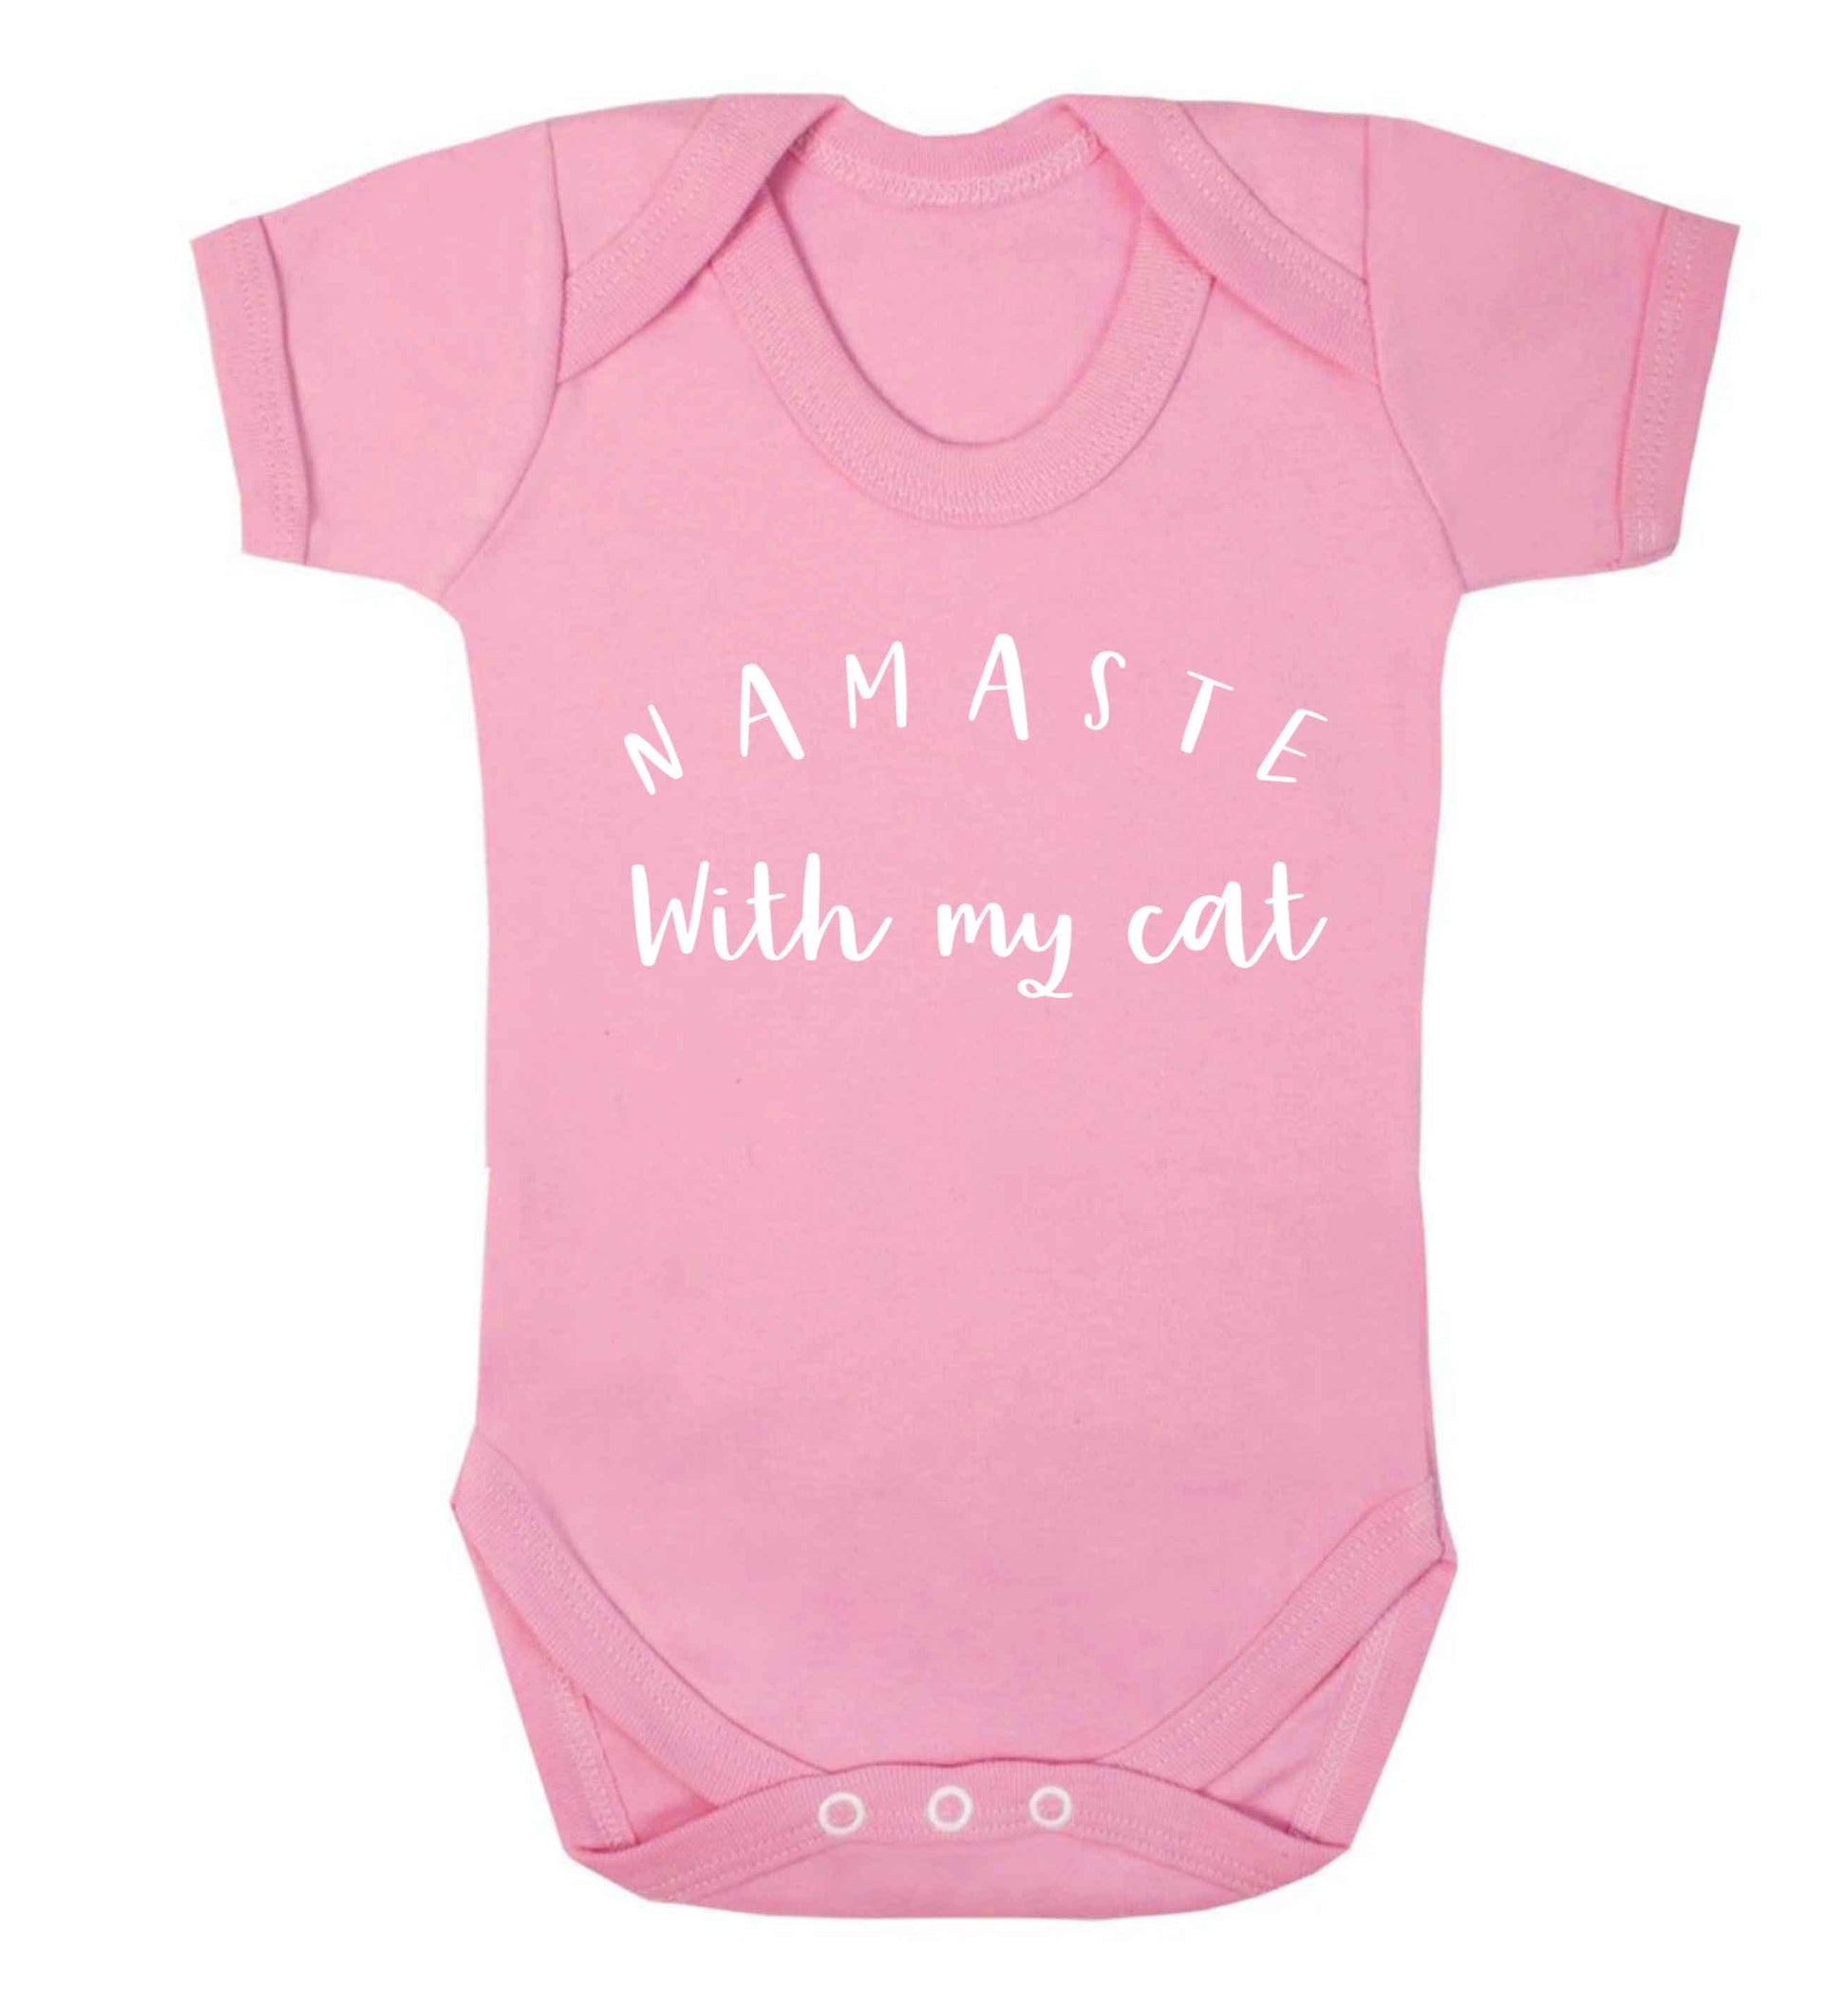 Namaste with my cat Baby Vest pale pink 18-24 months